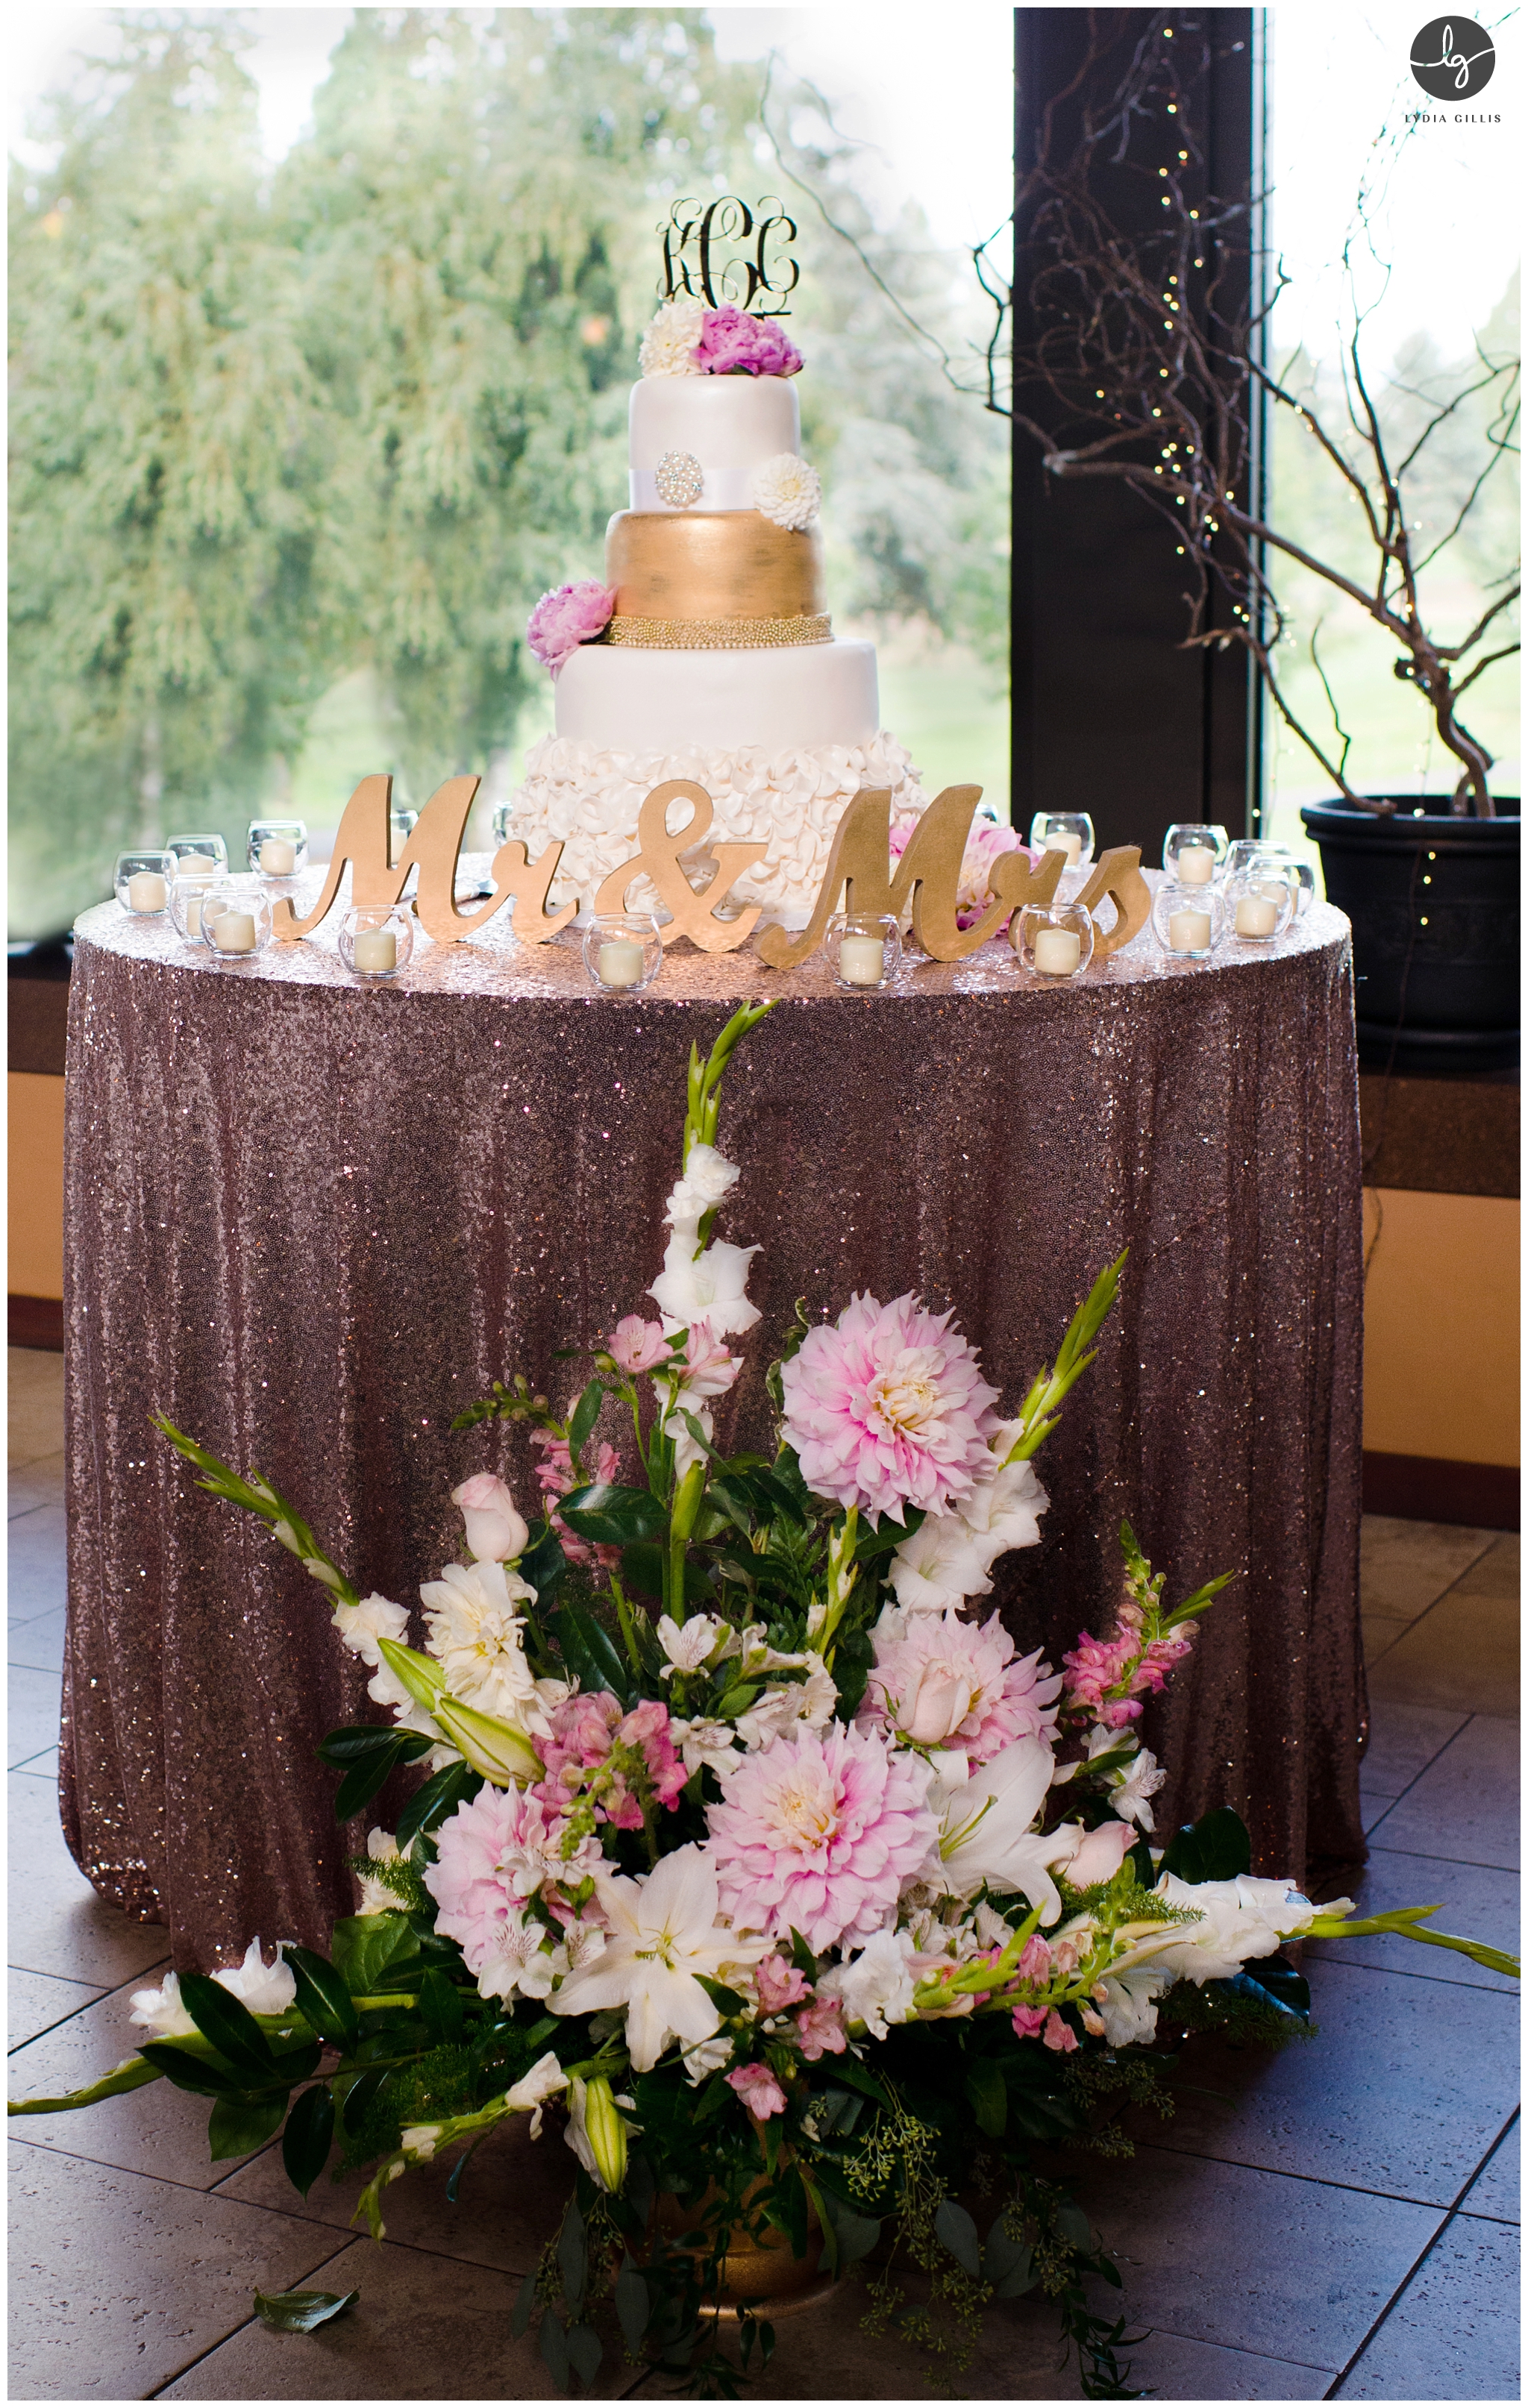 Blush table with gold and white cake | Lydia Gillis Photography